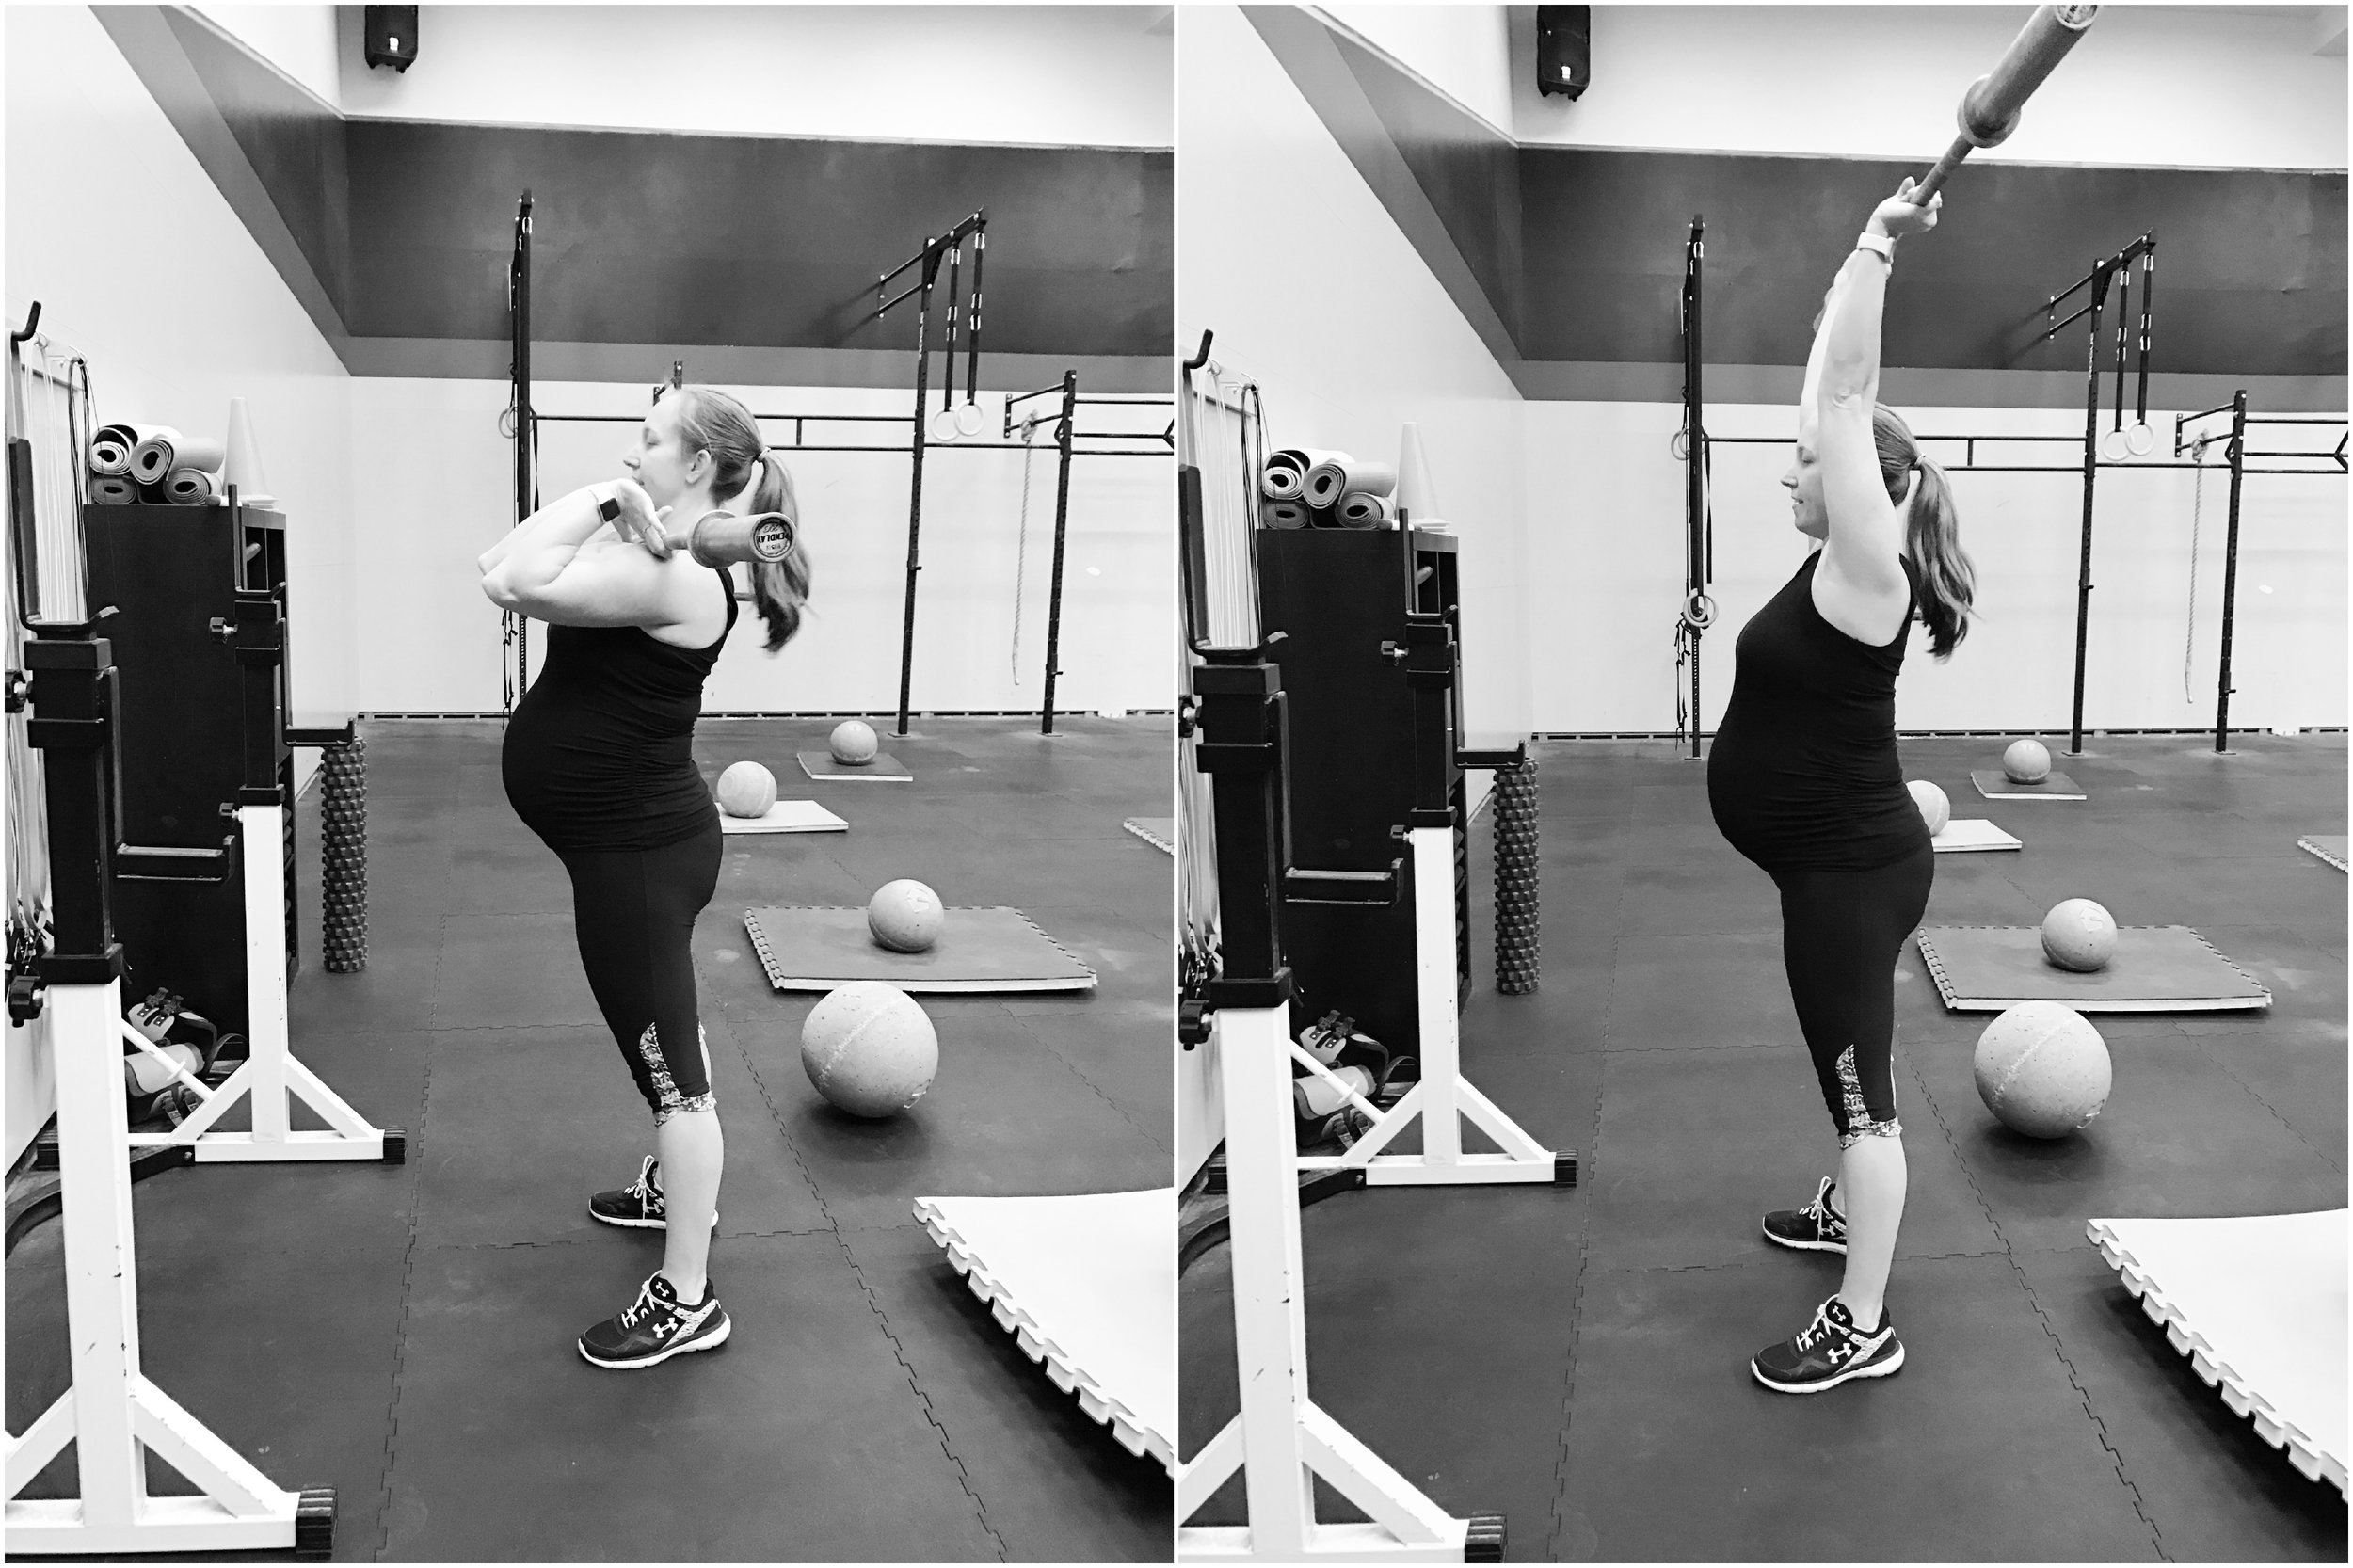  Push press! In the first and second trimester I did 65lbs but in the third trimester I used just the bar which is 35lbs. 